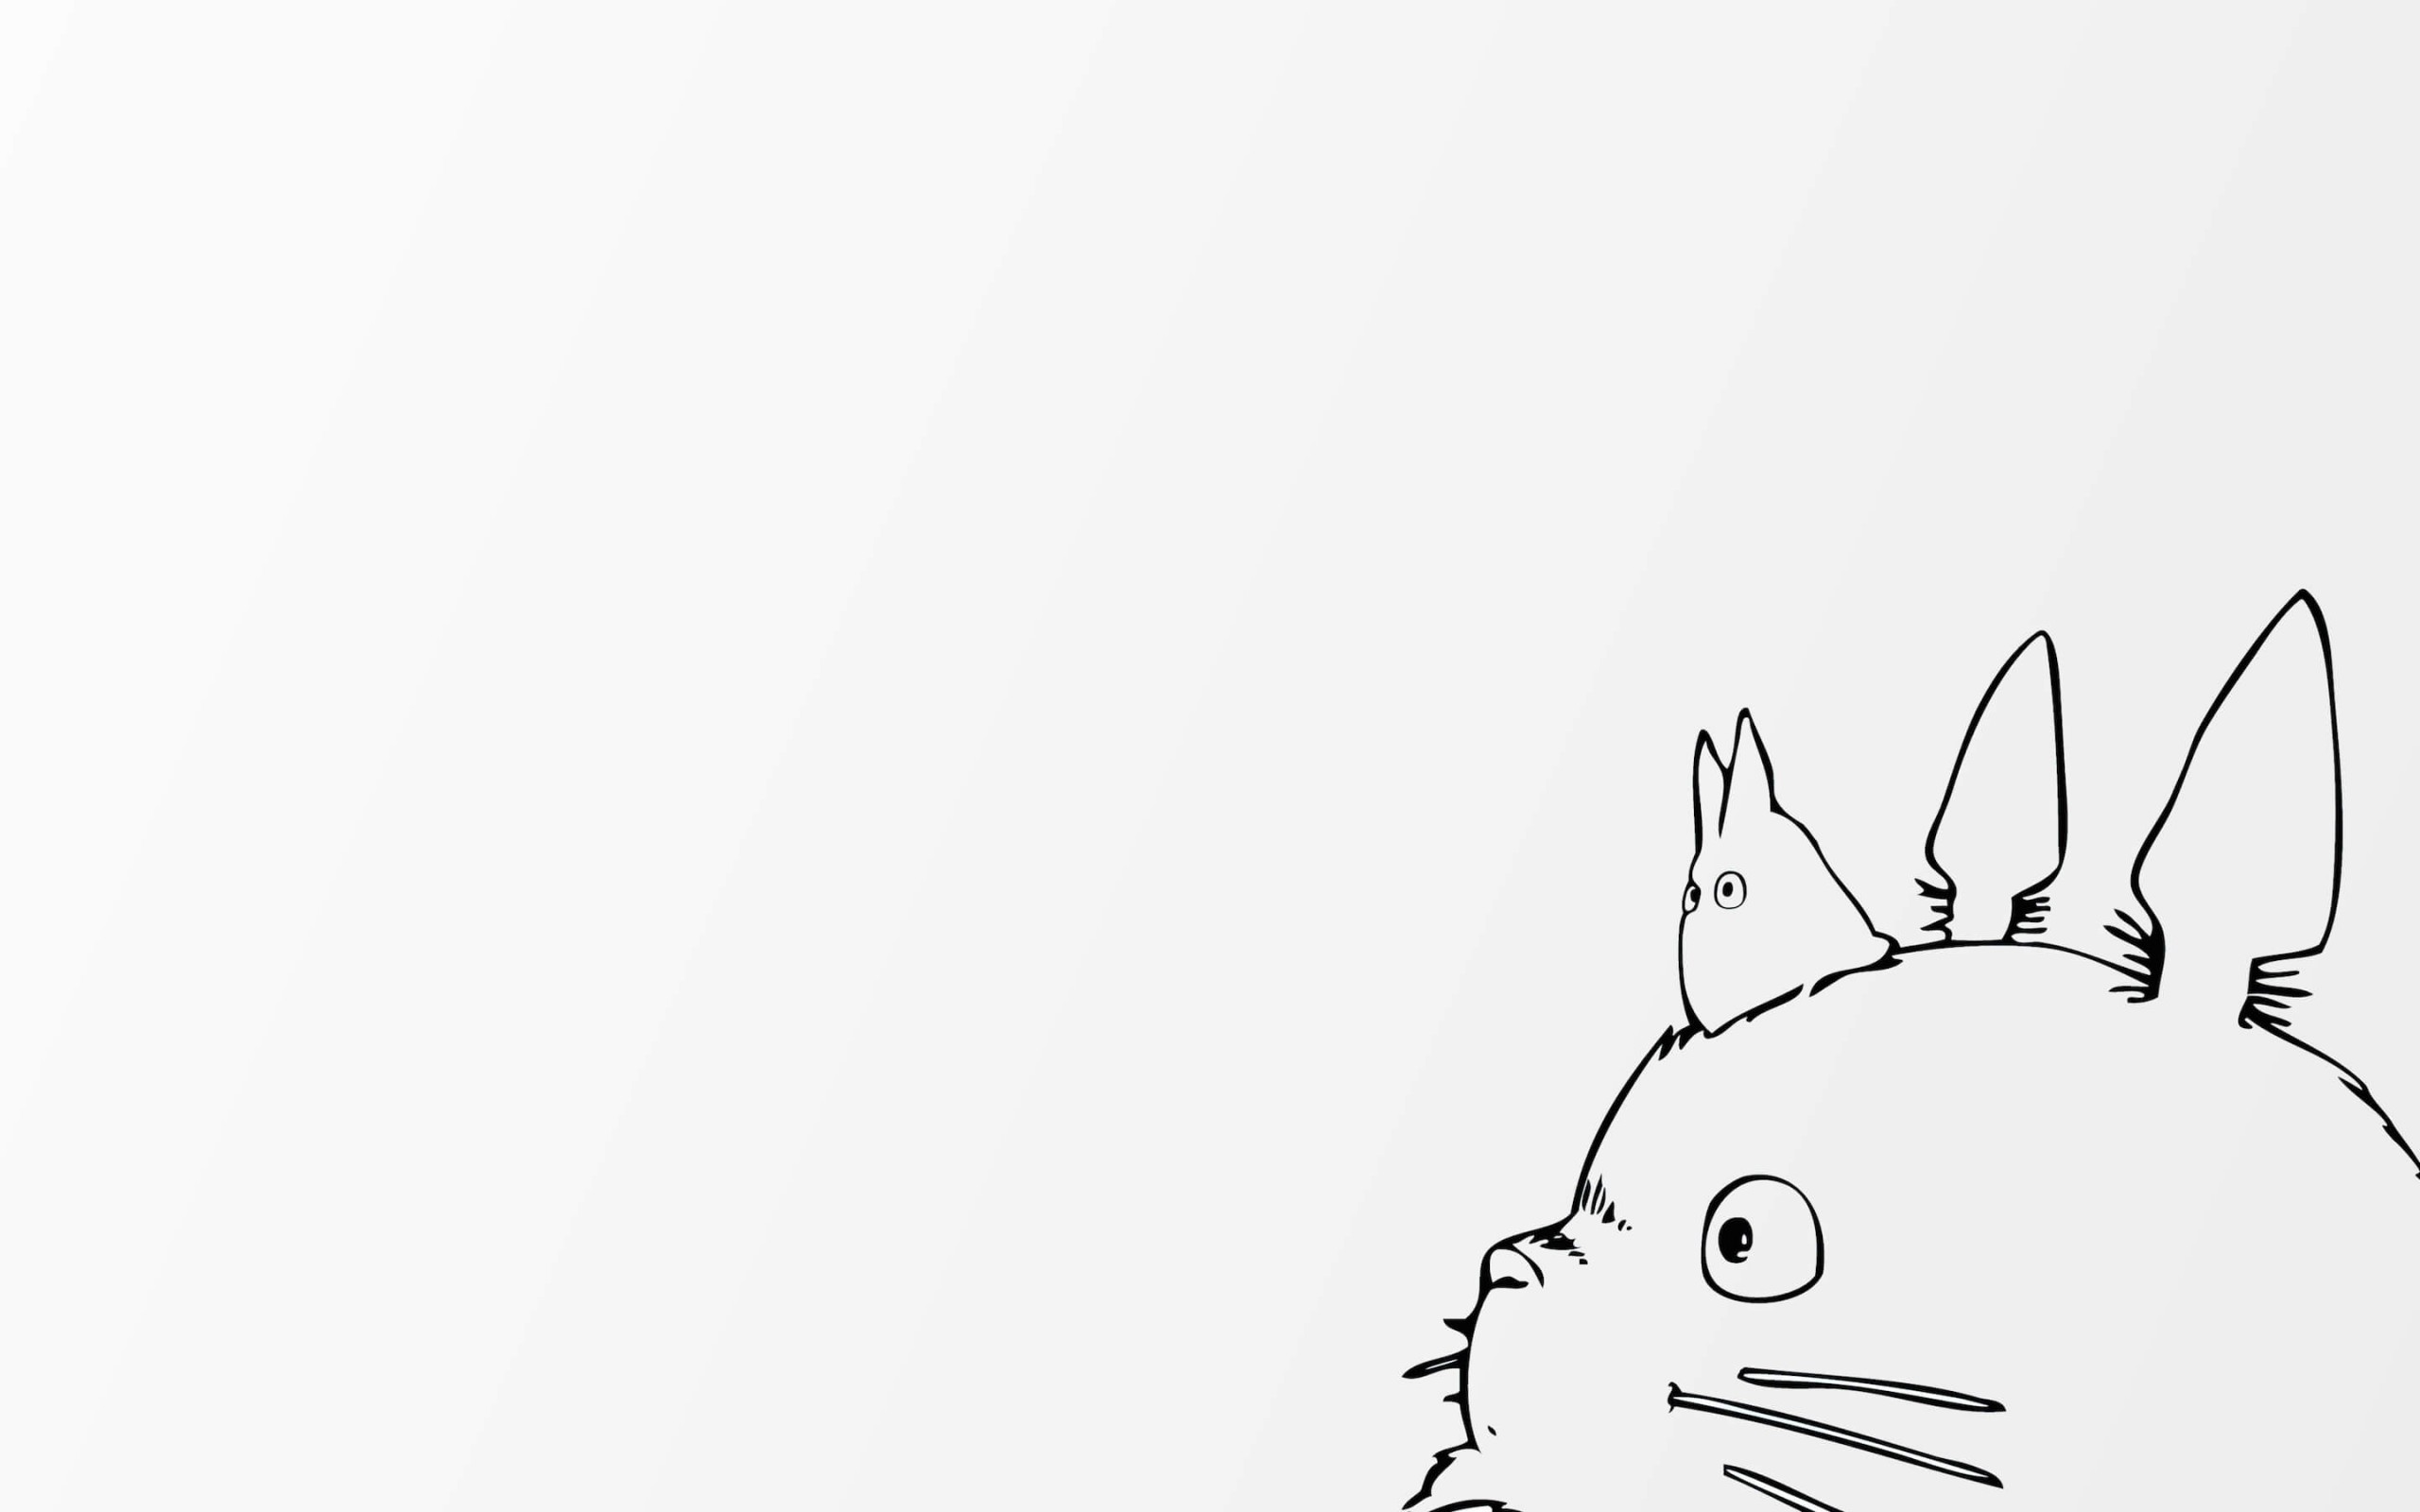 My Neighbor Totoro Wallpaper Backgrounds For Desktop Joker Wallpapers Totoro Kawaii Wallpaper